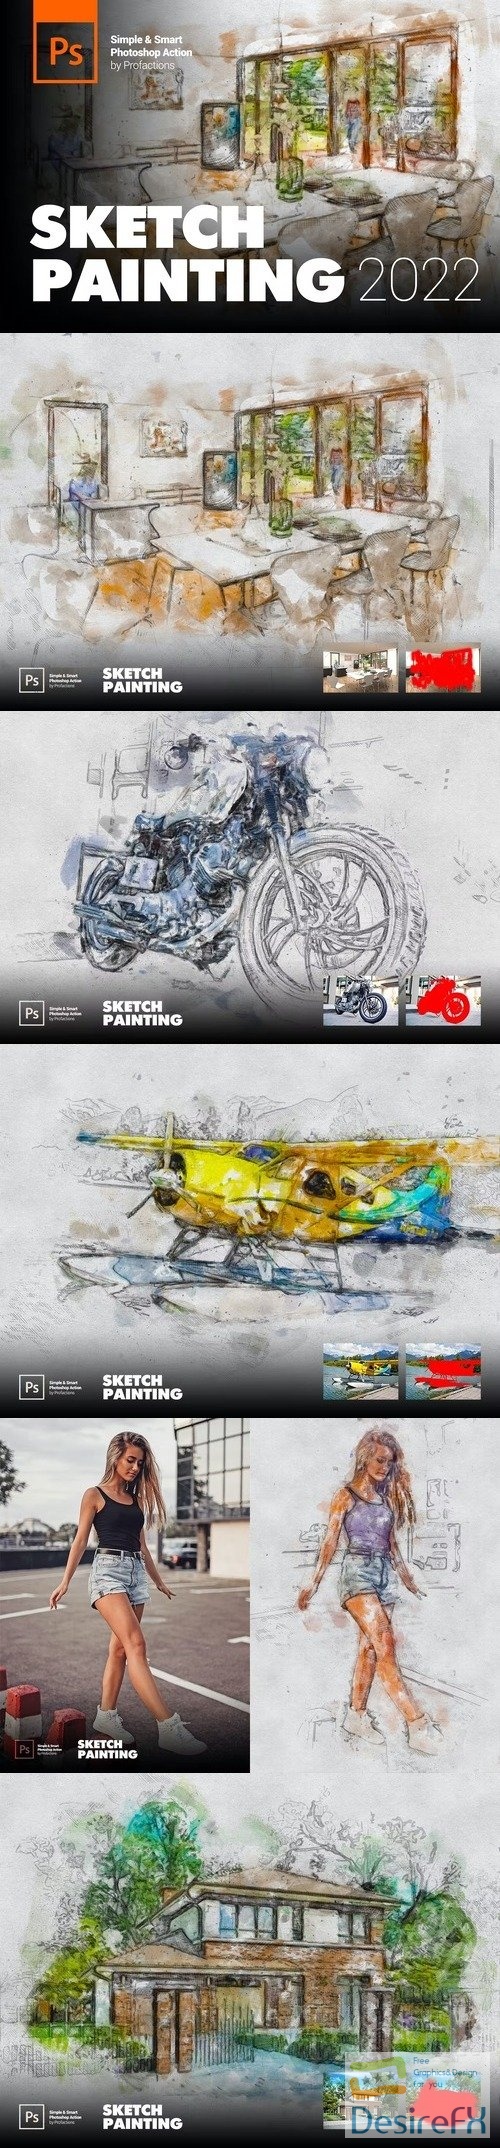 Sketch Painting Photoshop Action